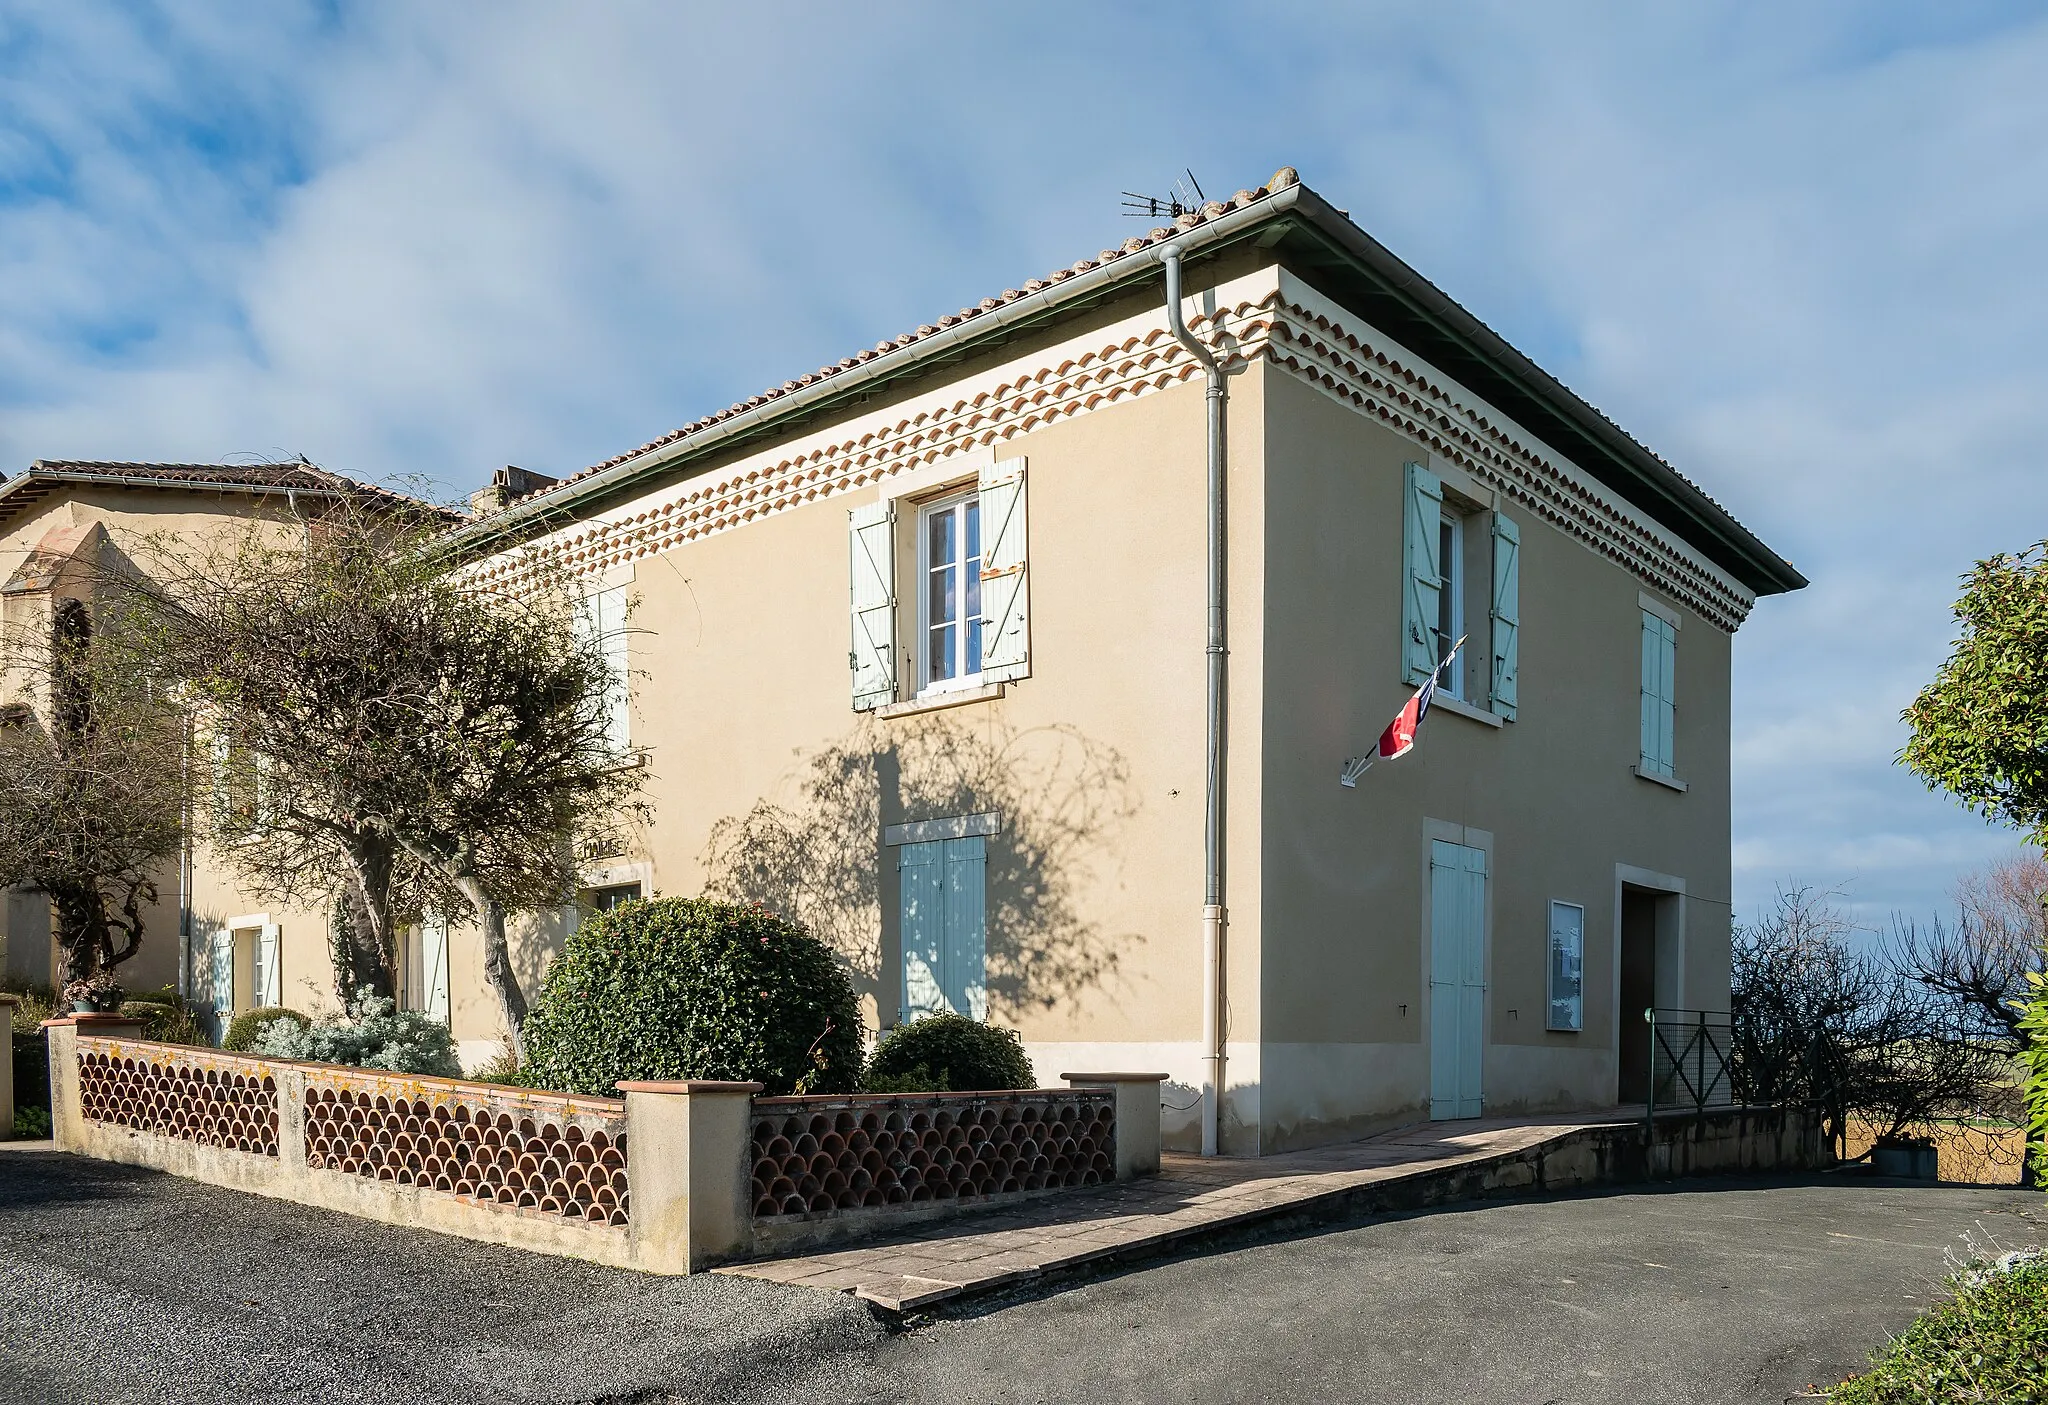 Photo showing: Town hall of Garravet, Gers, France